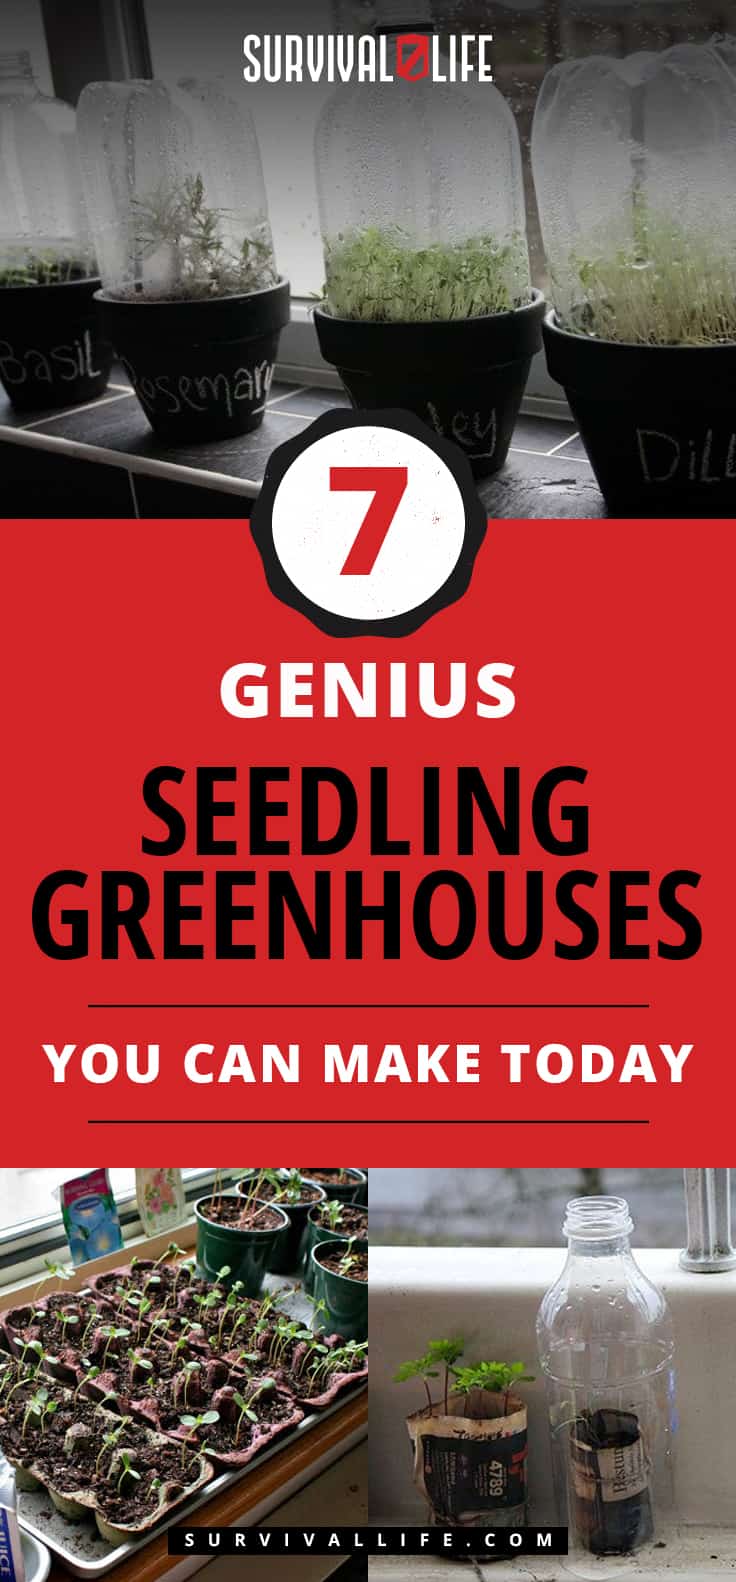 Seedling Greenhouses | 7 Genius Seedling Greenhouses You Can Make Today